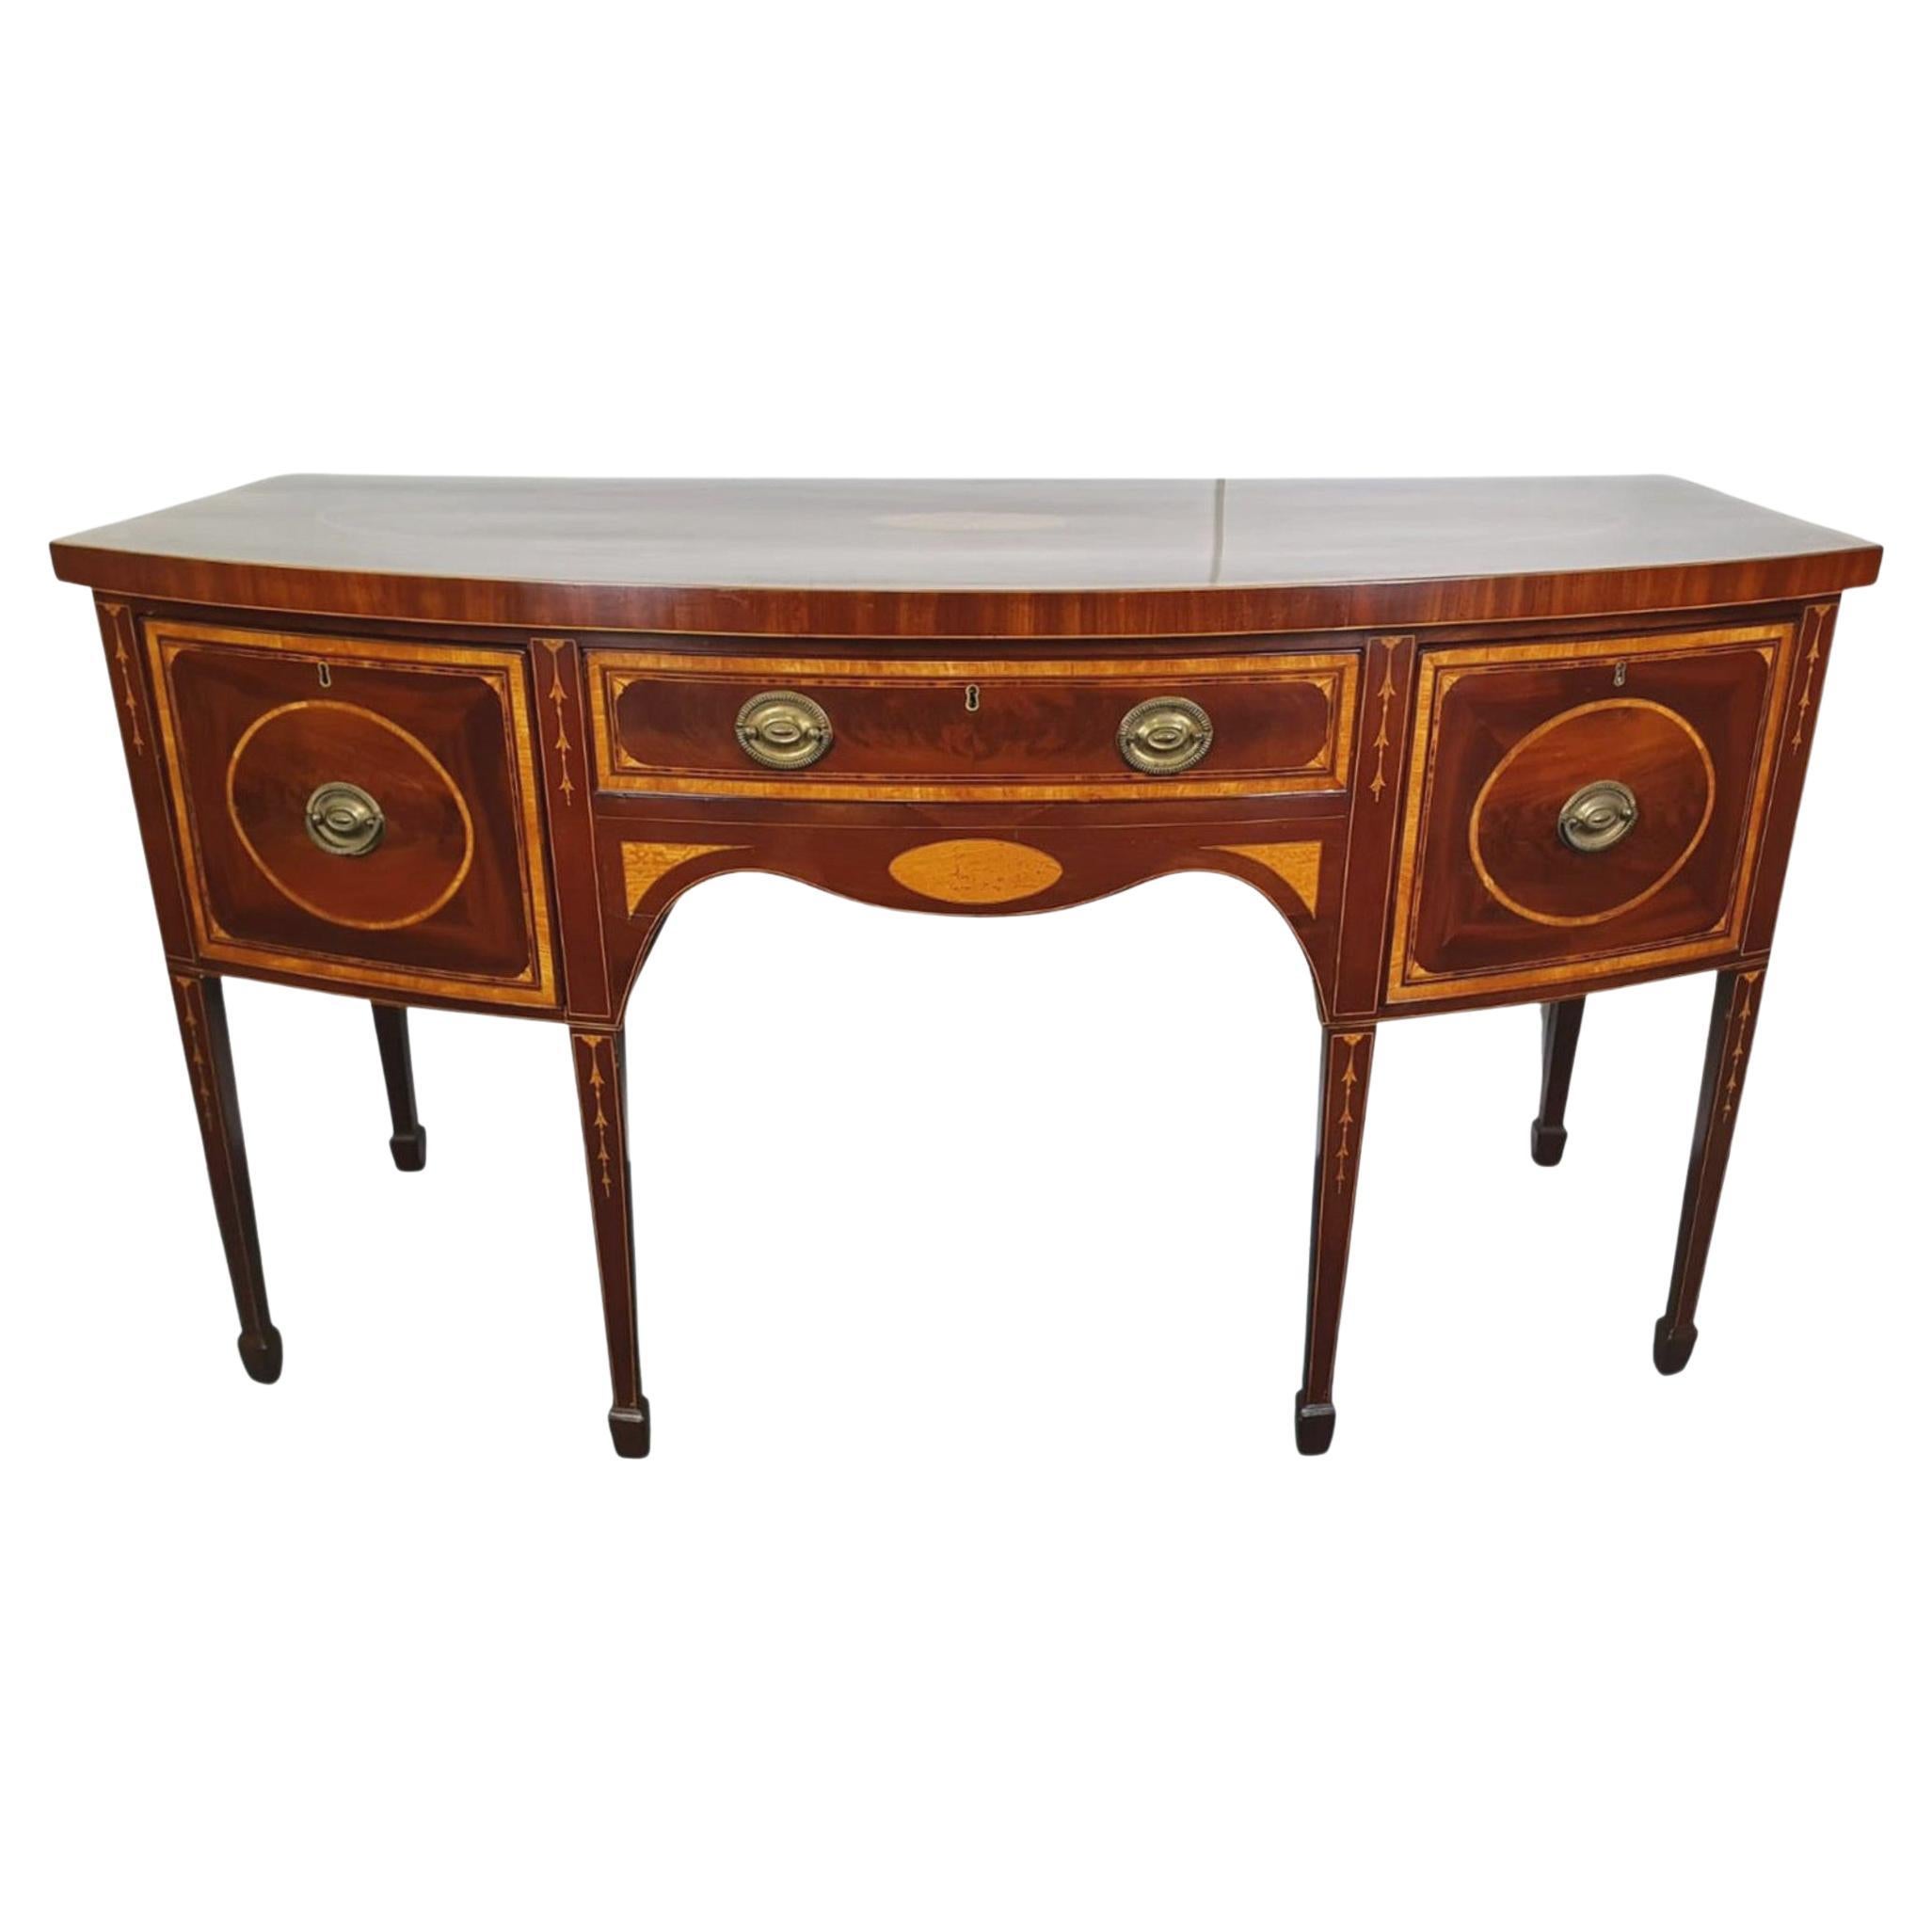 Very Fine 19th Century Inlaid Mahogany Bowfront Sideboard For Sale